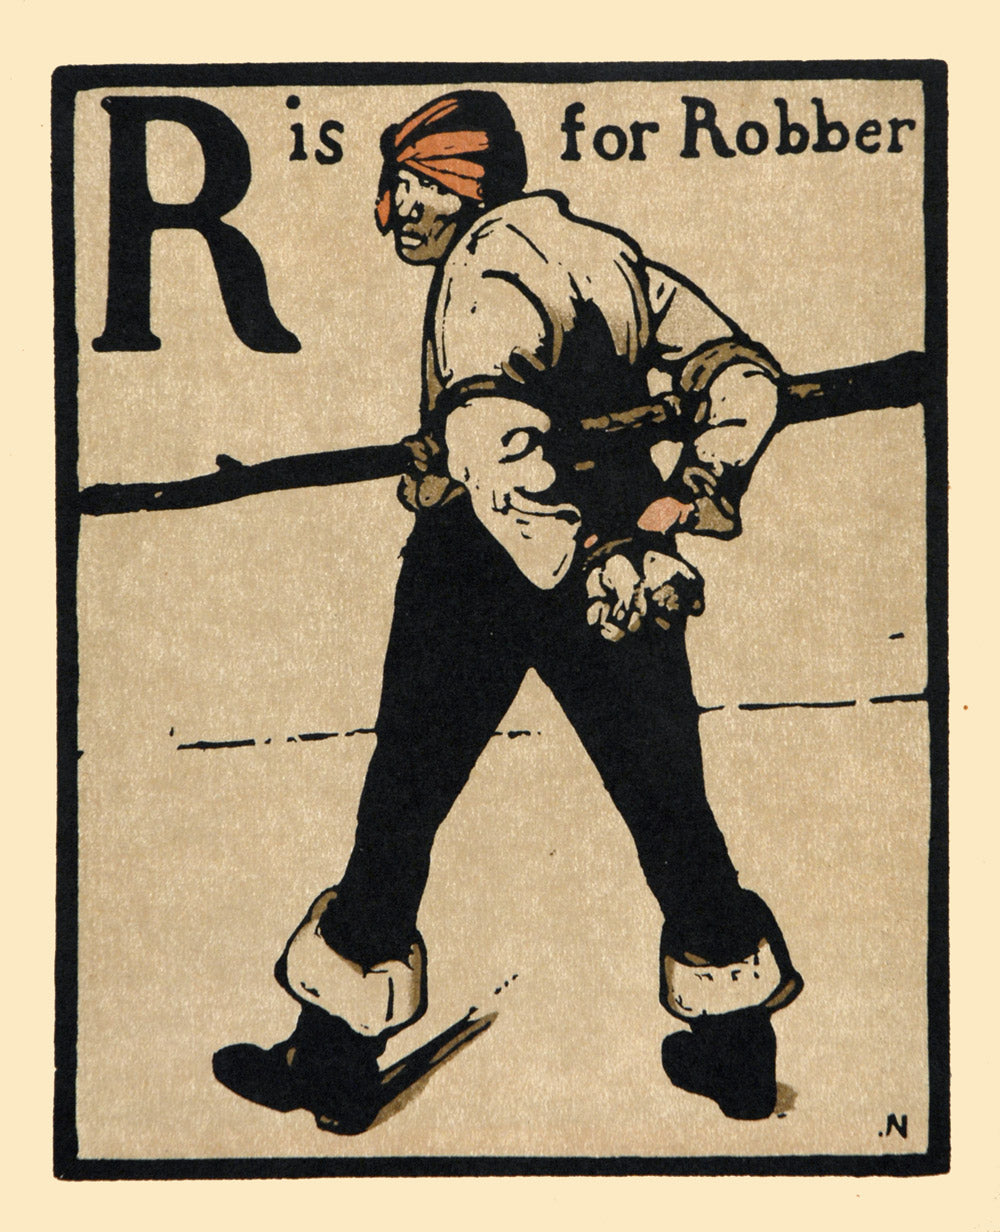 R is for Robber